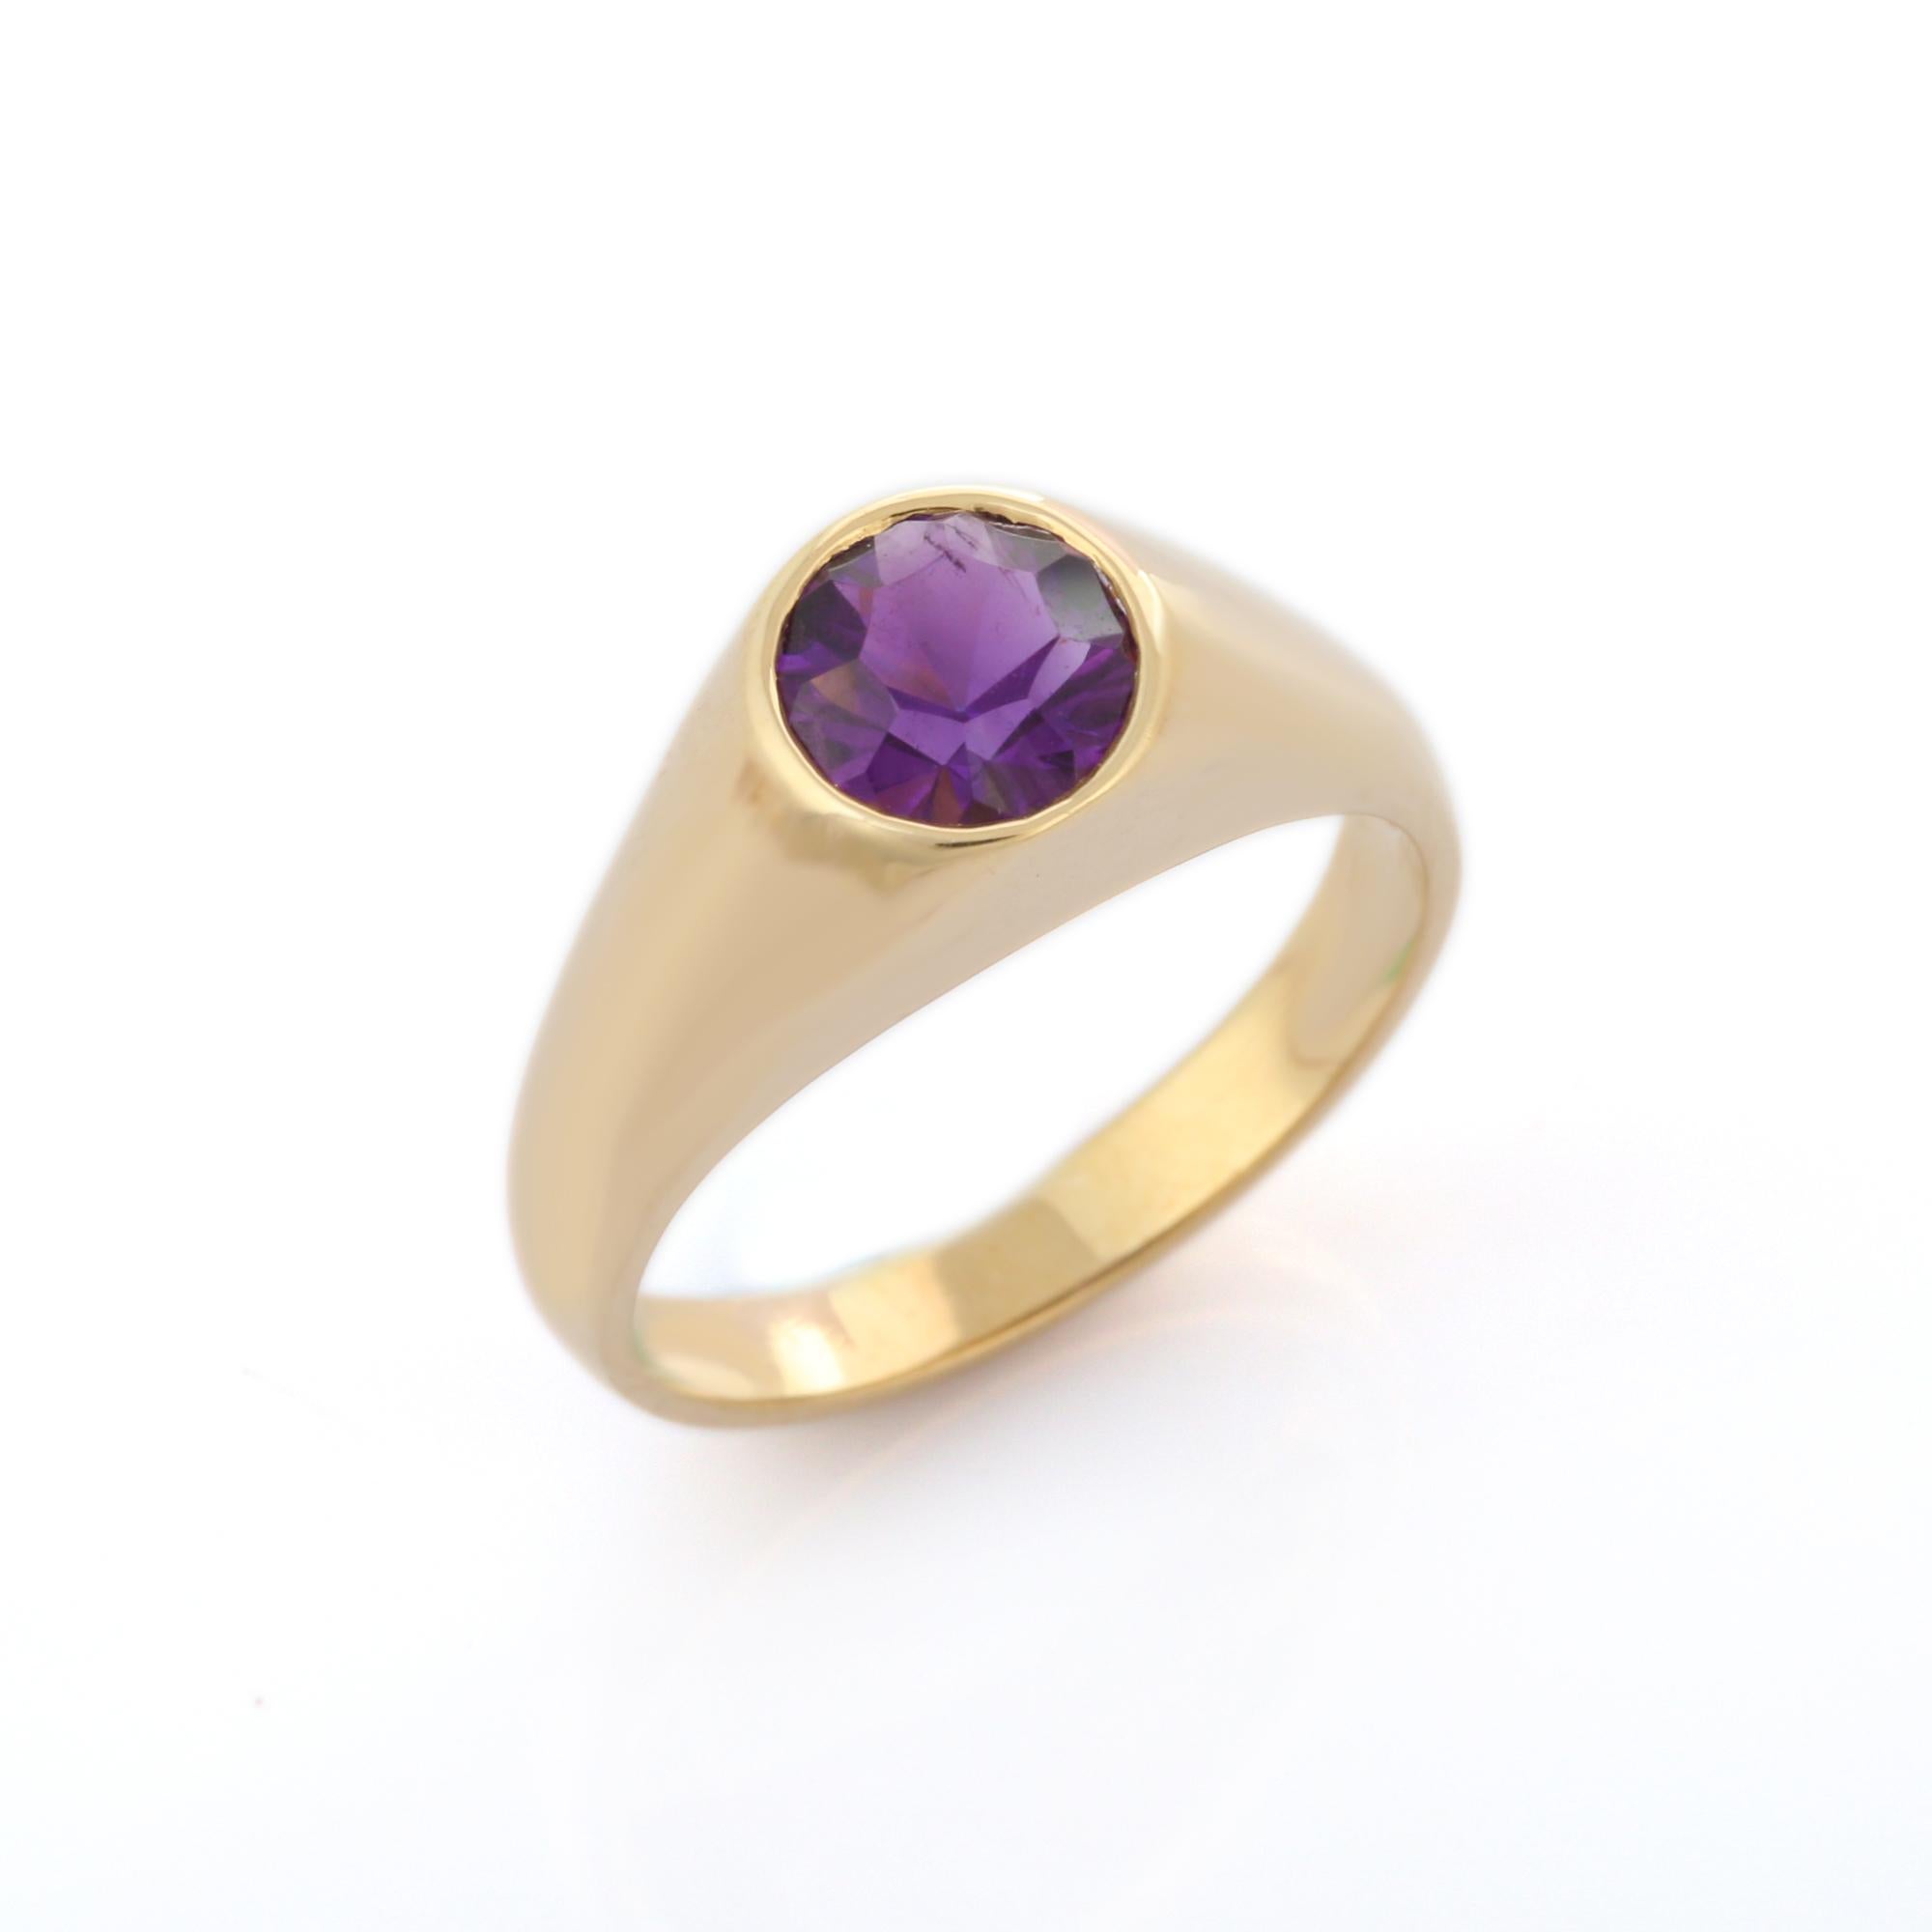 For Sale:  Unisex 14 Karat Yellow Gold Round Cut Amethyst Solitaire Ring 7